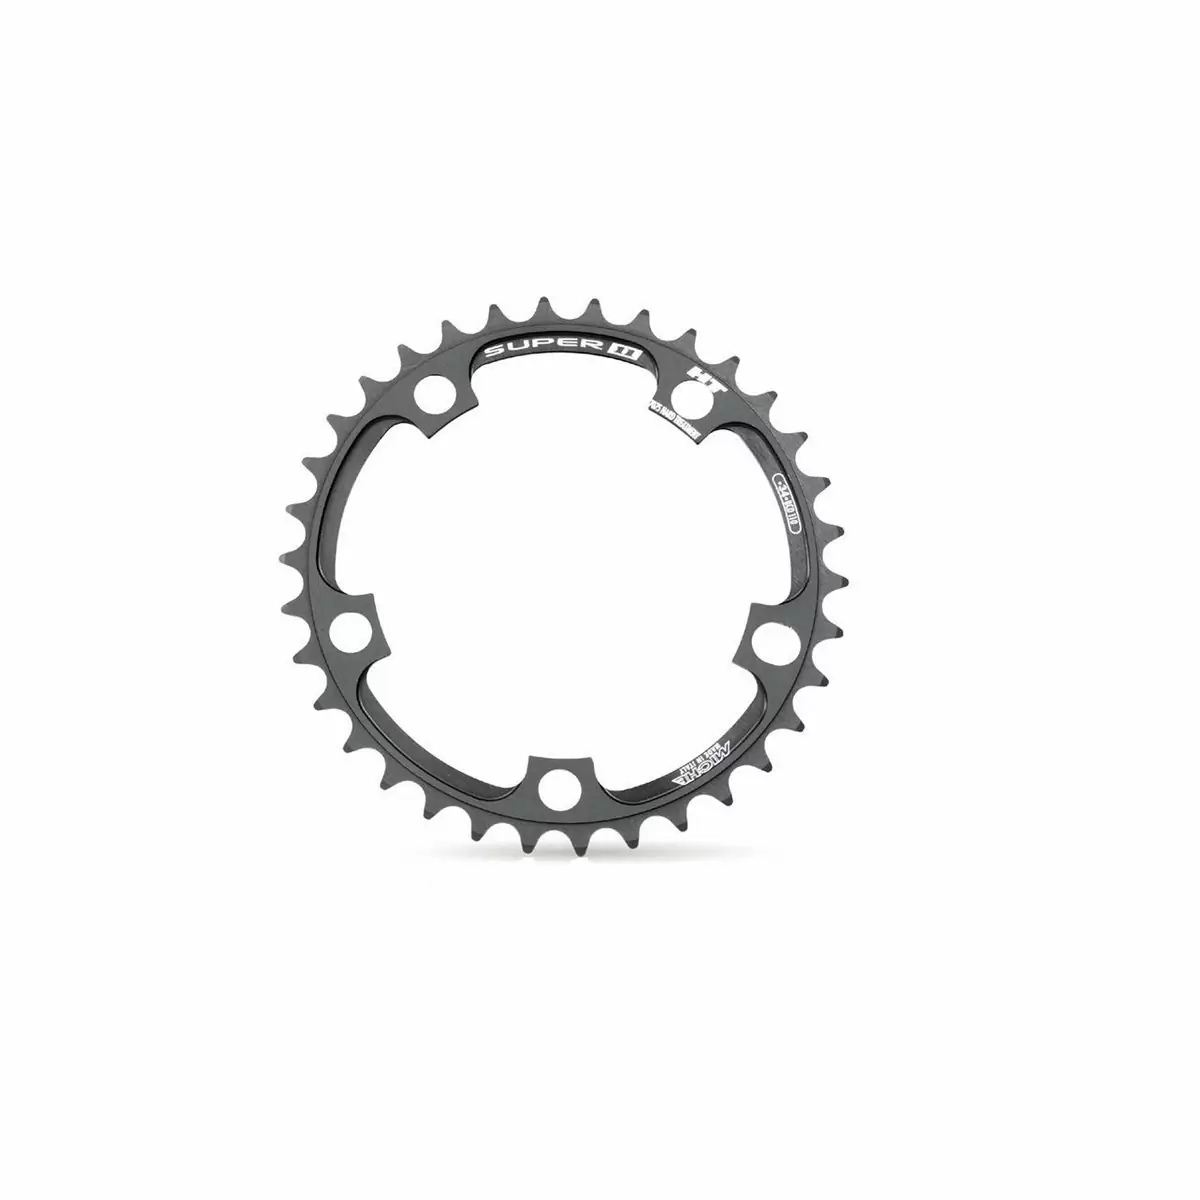 Inner chainring Super 11 bcd 110mm 34T Campagnolo 11 speed - image